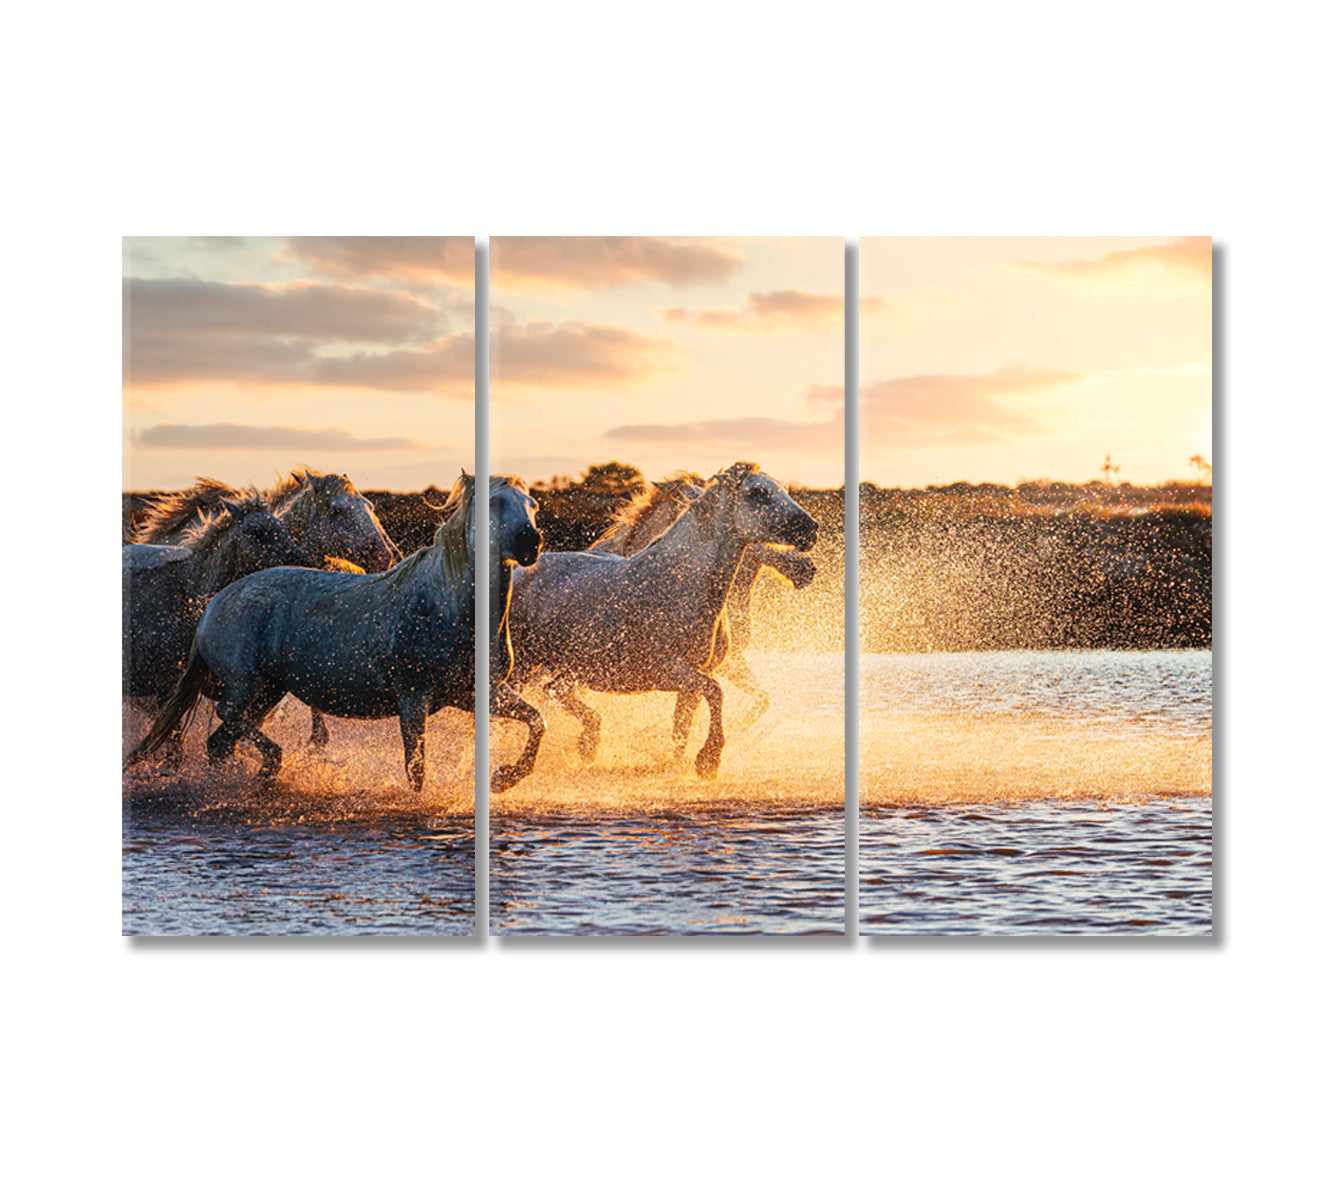 Wild White Horses of Camargue Running on Water Canvas Print-Canvas Print-CetArt-3 Panels-36x24 inches-CetArt